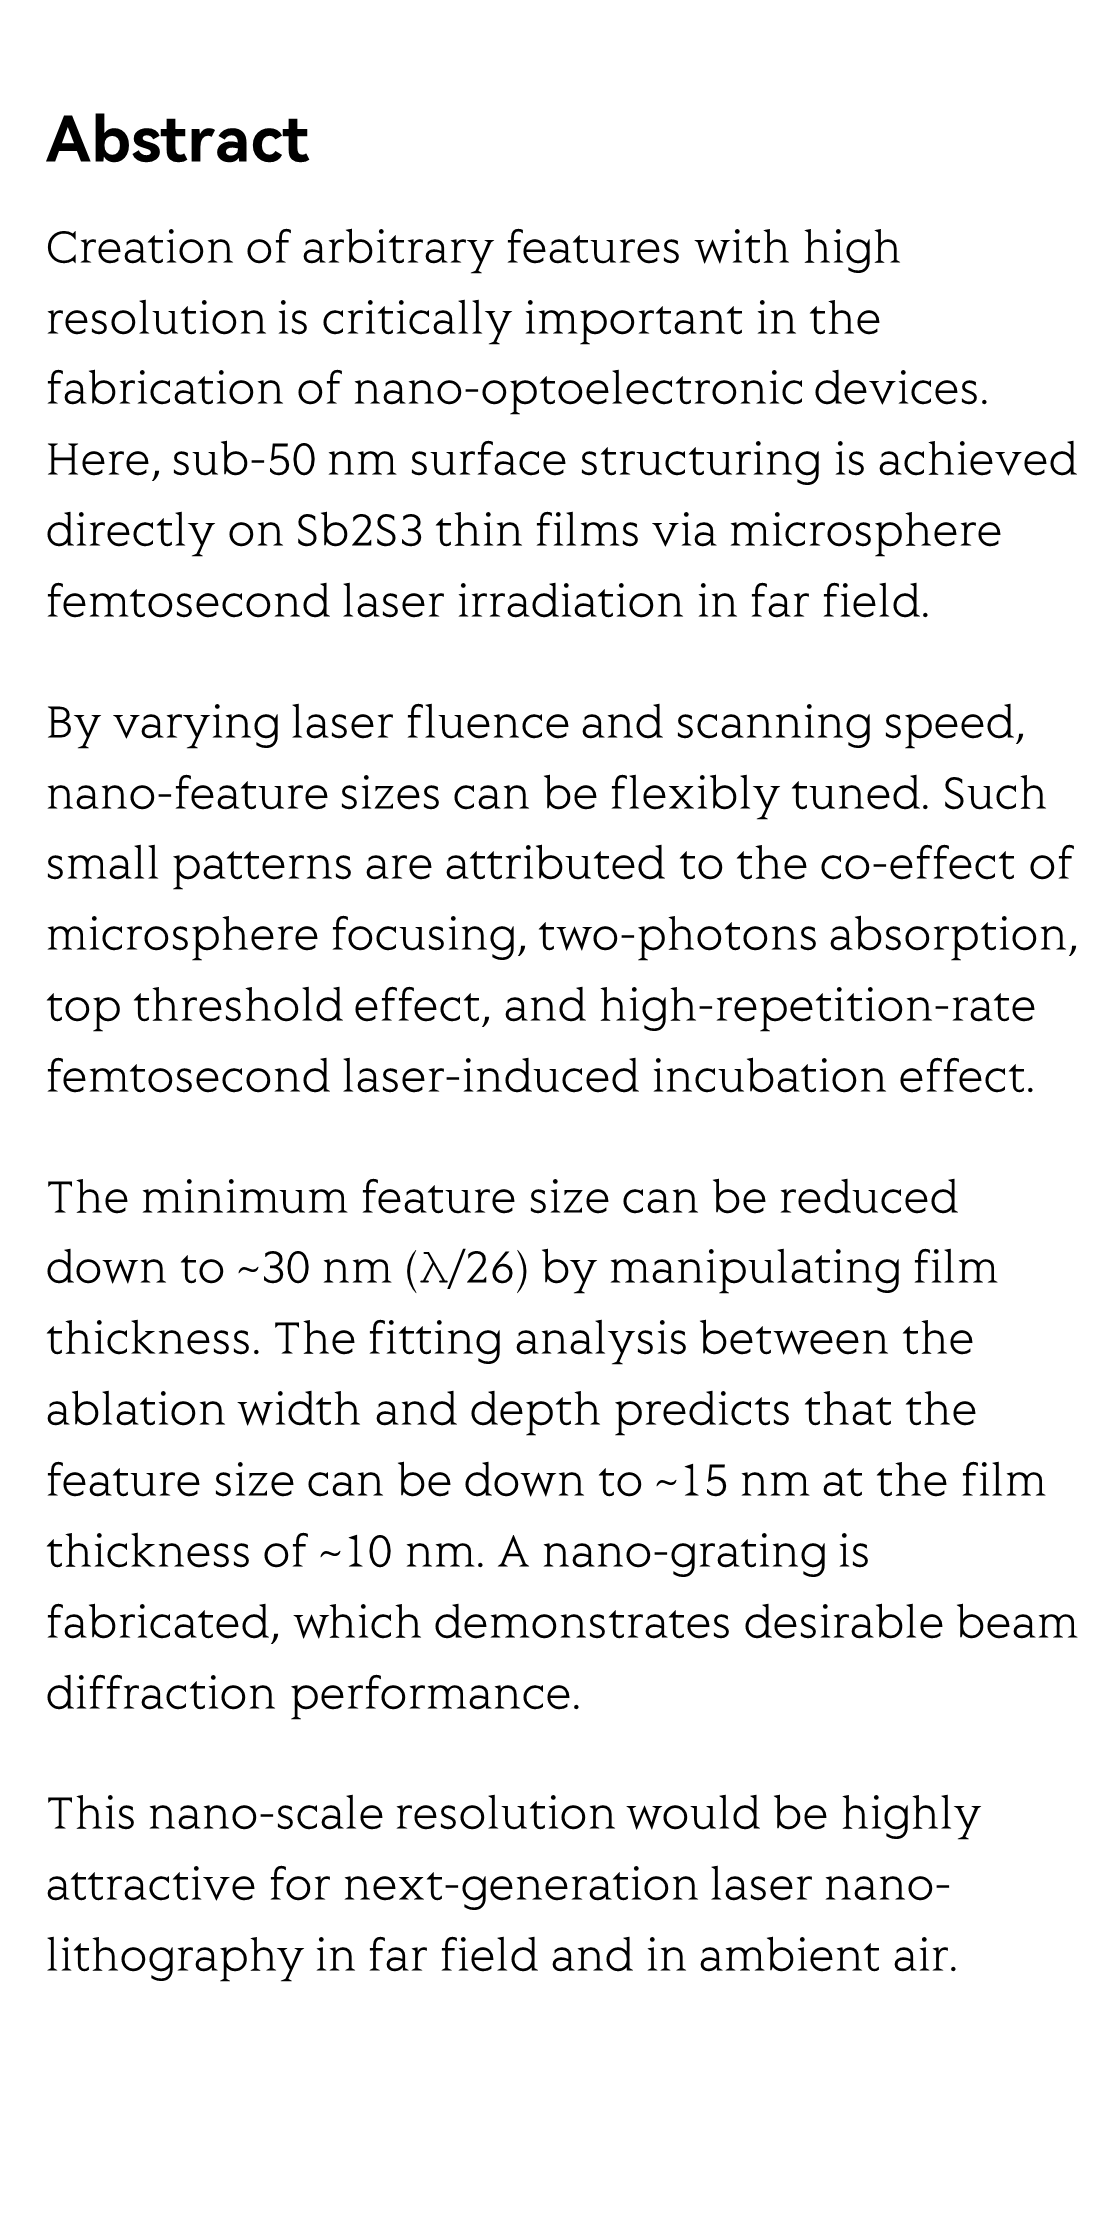 Microsphere femtosecond laser sub-50 nm structuring in far field via non-linear absorption_2